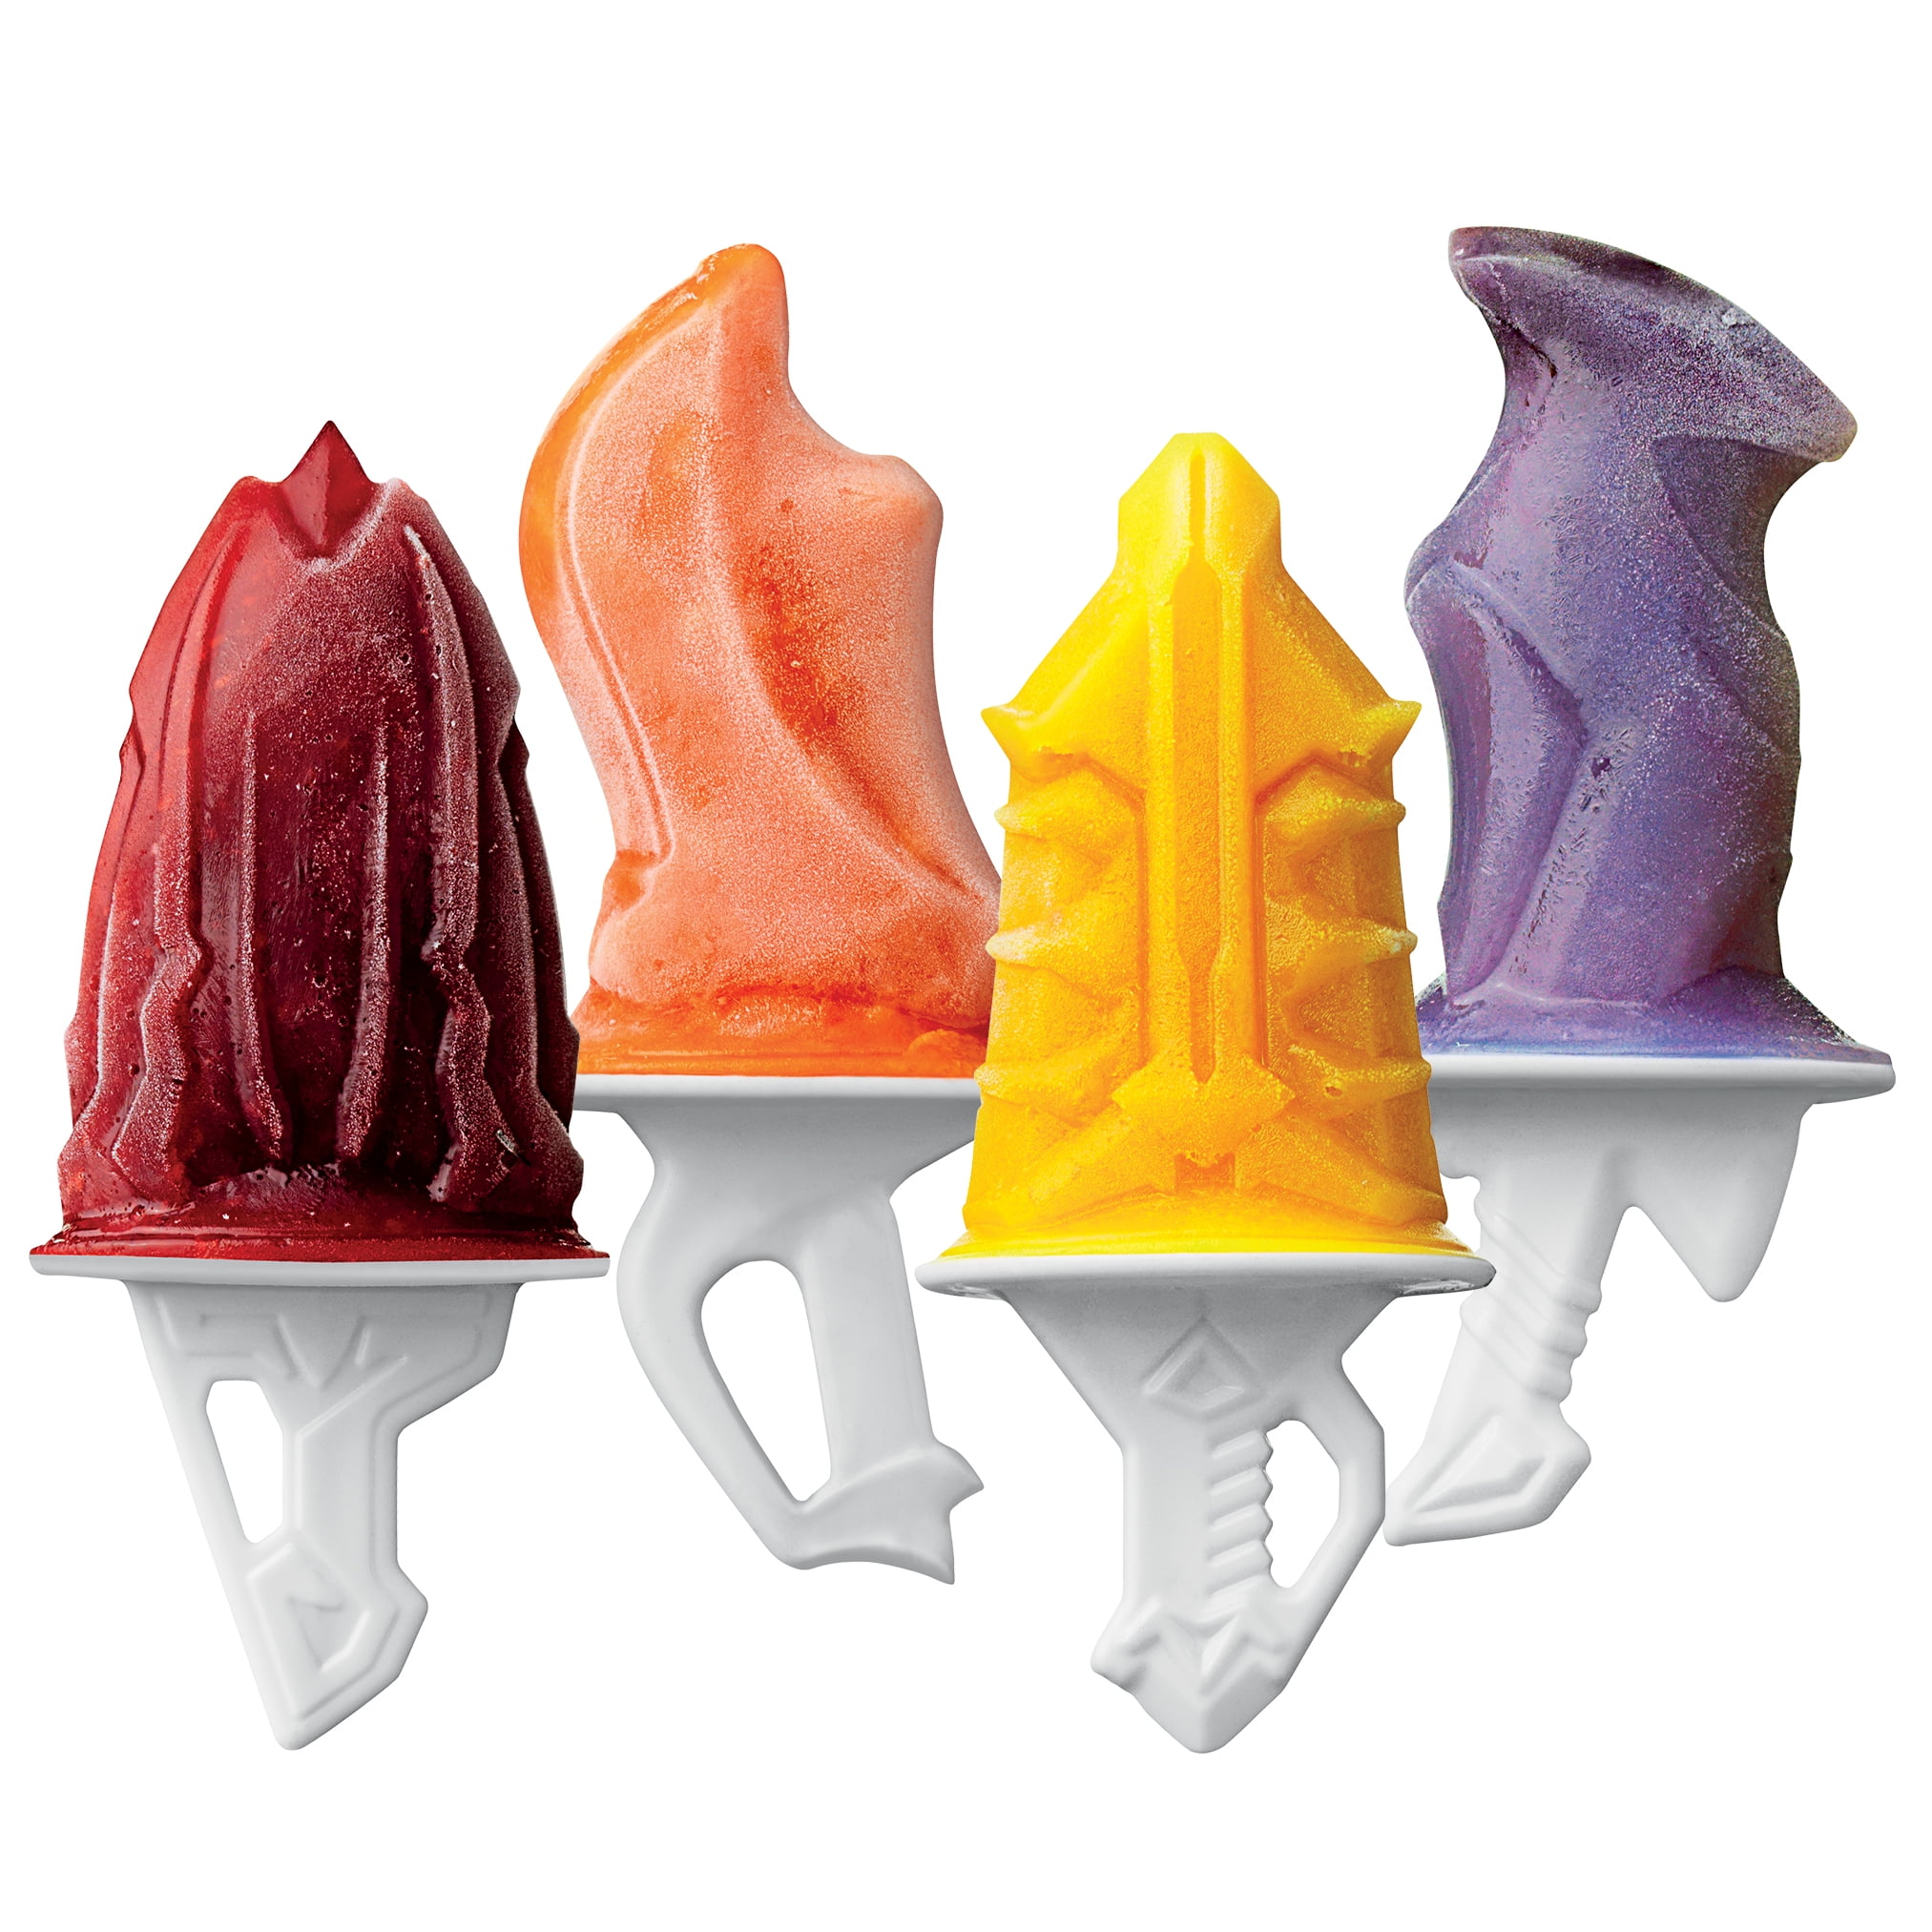 Tovolo Monster Pop Molds Set of 4